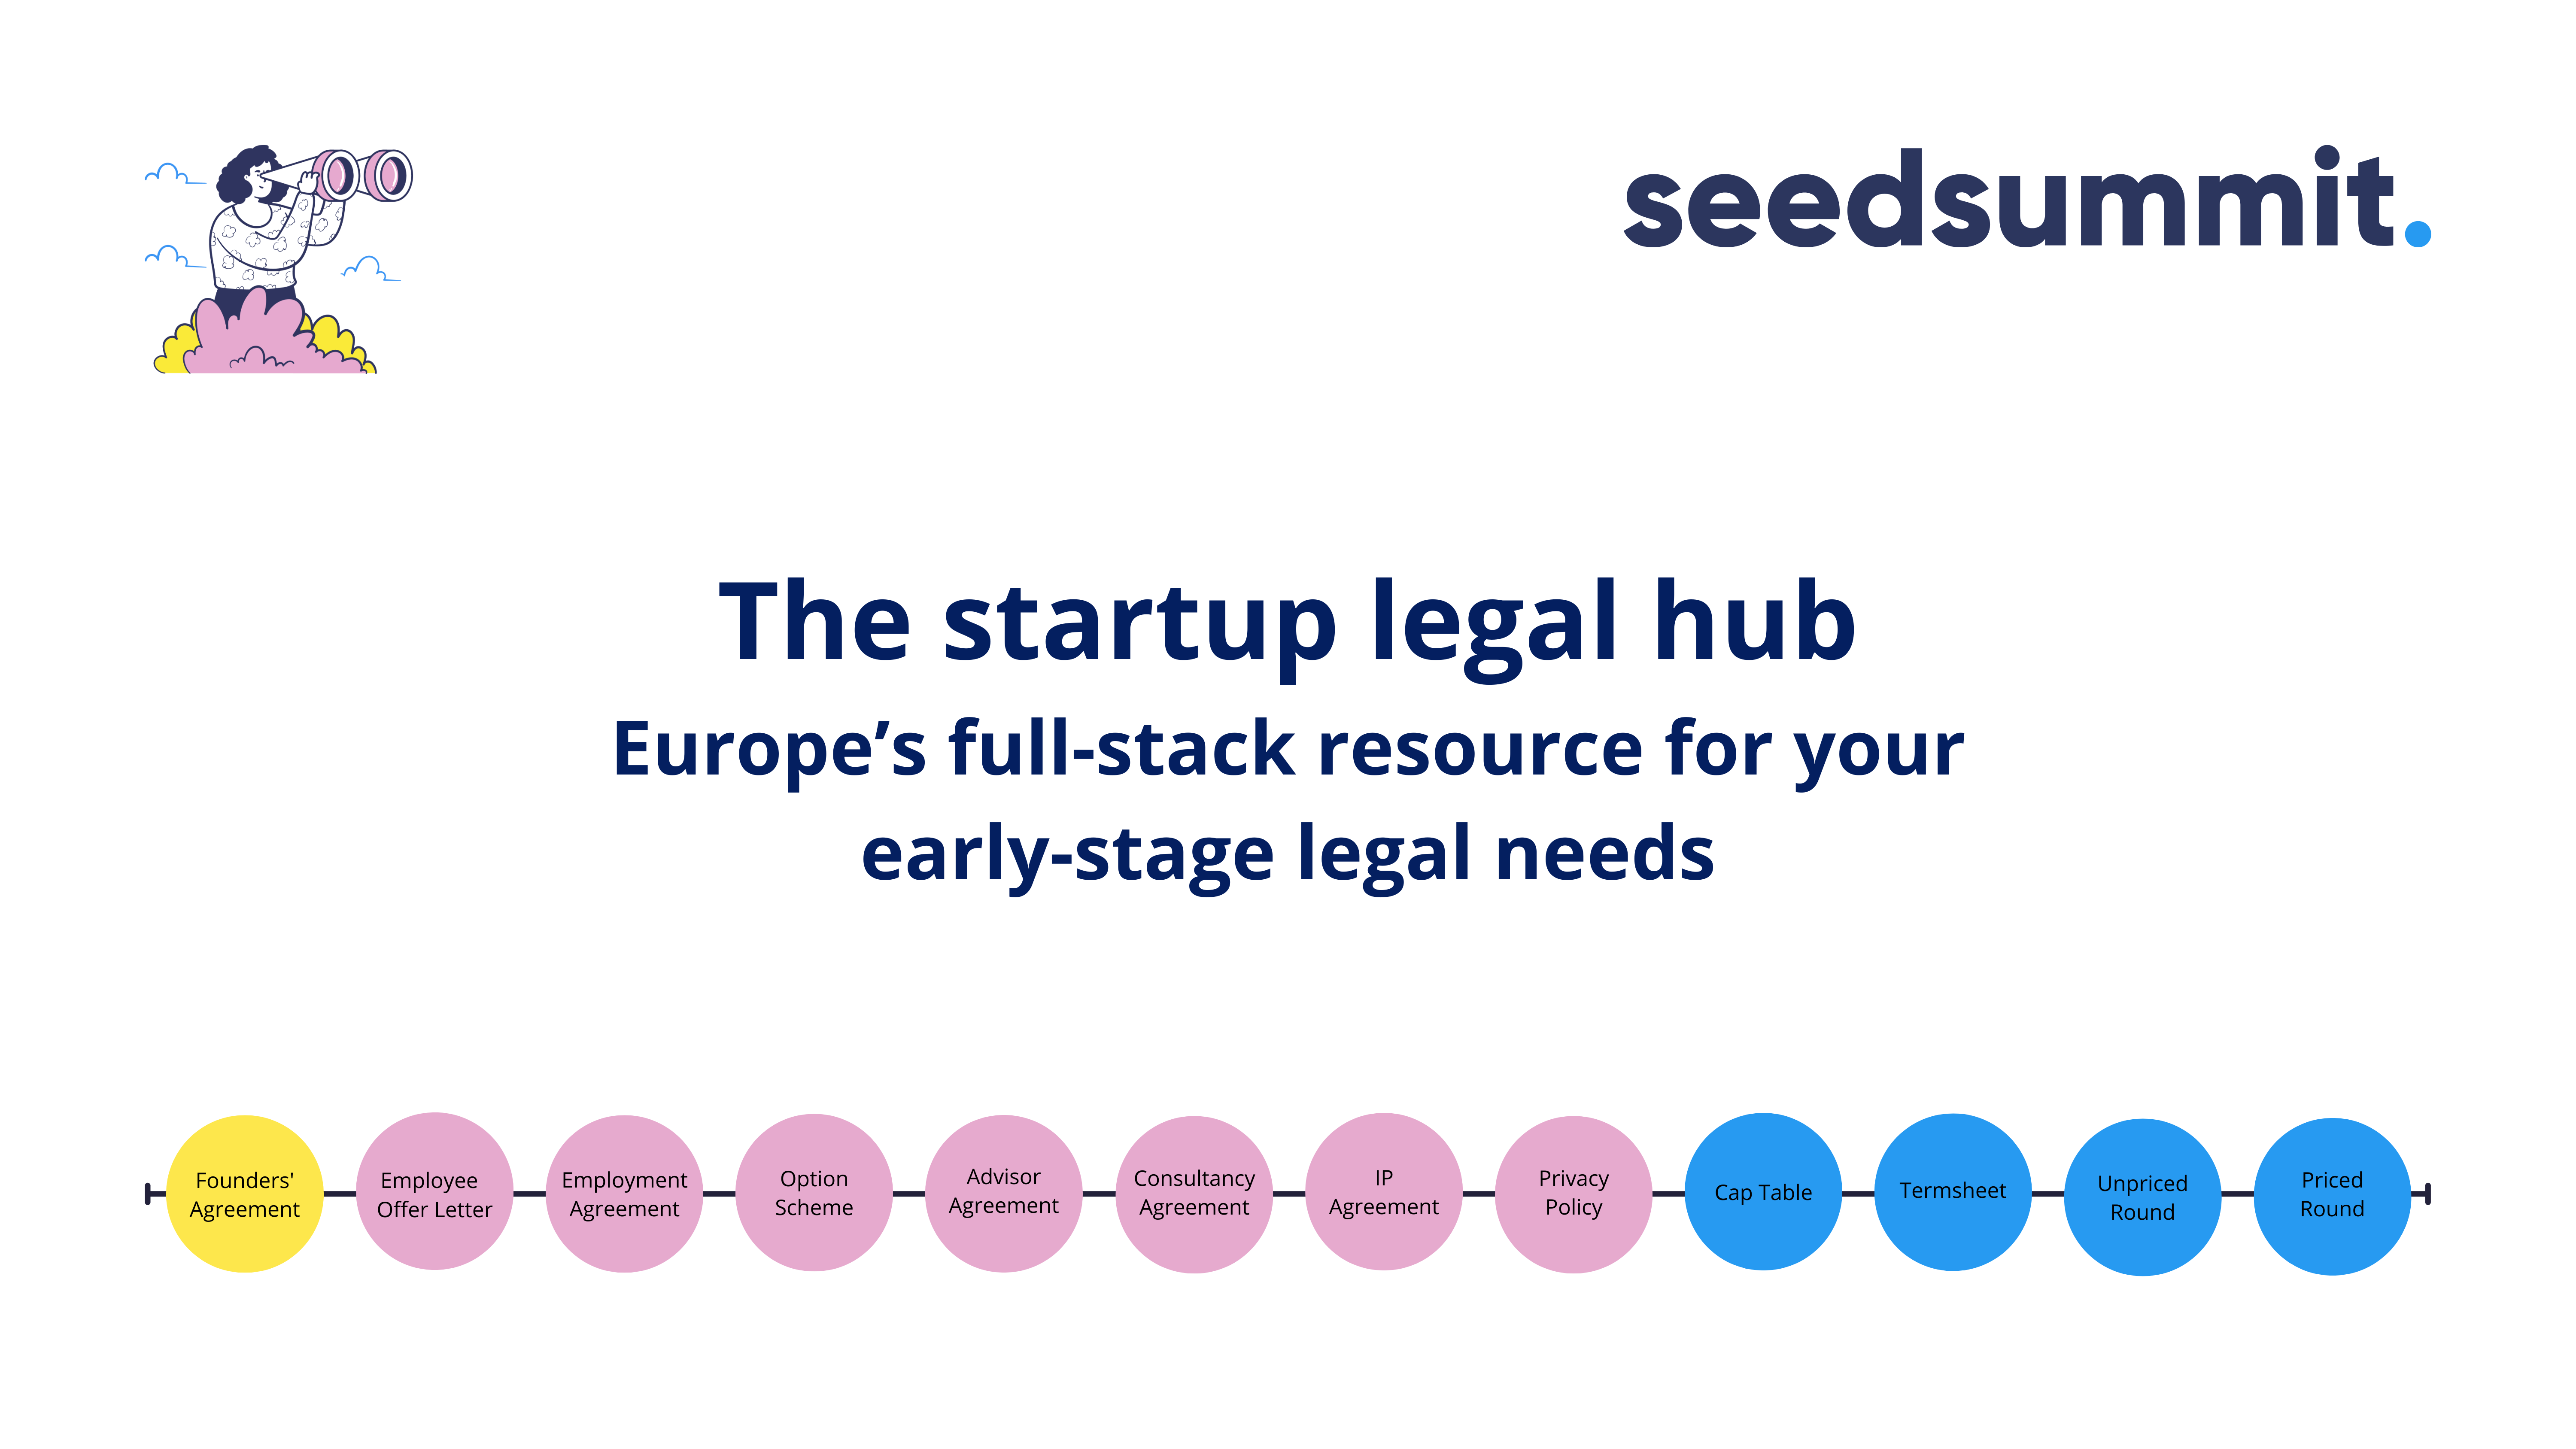 Why we are supporting Seedsummit's mission to simplify the startup legal journey